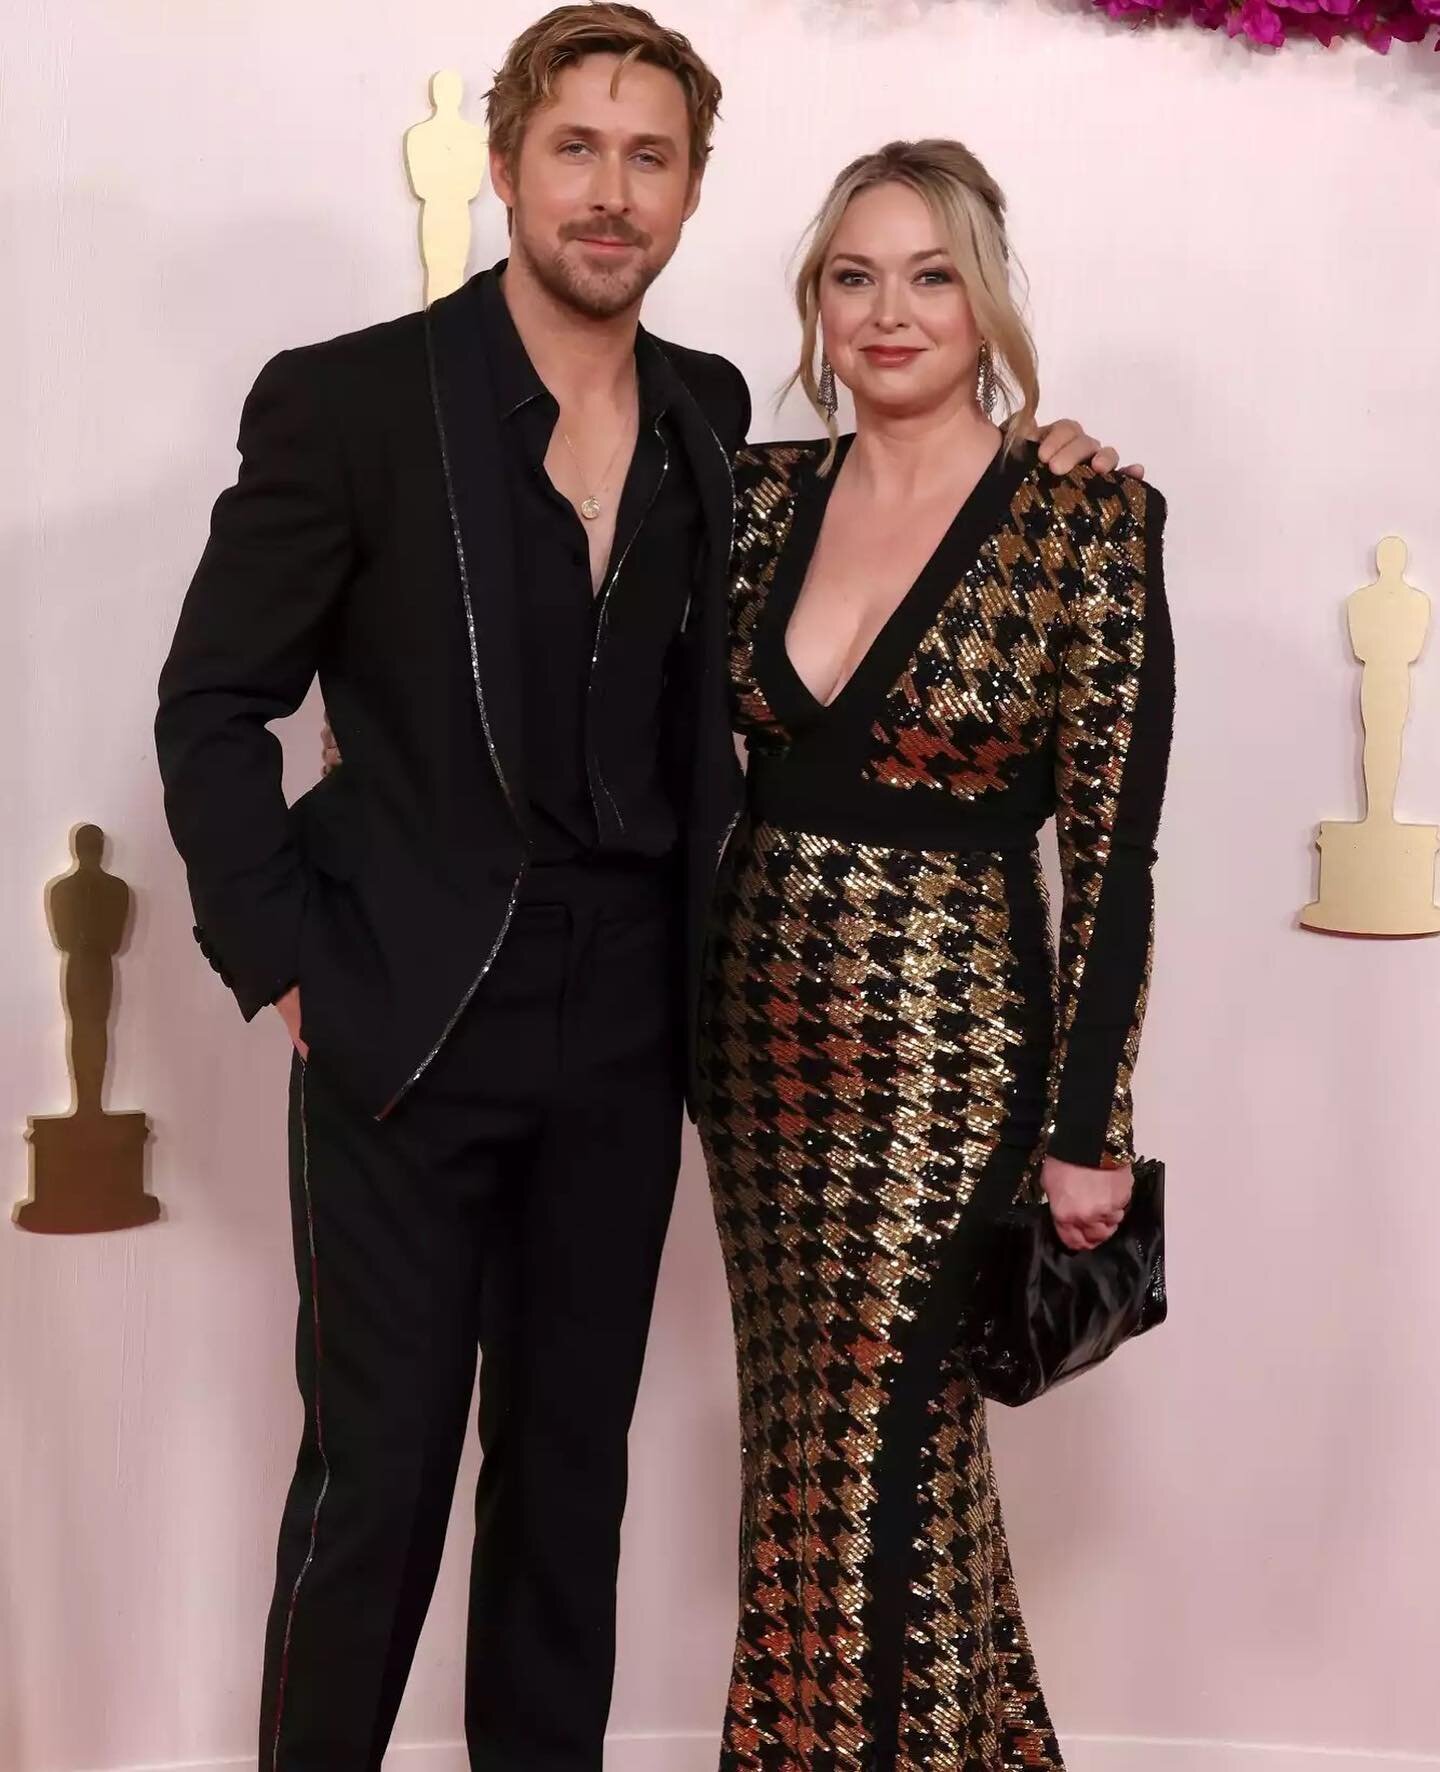 ❤️ RED CARPET ROYALS ❤️

Ryan Gosling&rsquo;s sister, Mandi wears @_zhivago_&rsquo;s Down in Flames Gown to the 2024 #oscar awards 🔥

This marks the first (and it won&rsquo;t be last) time #zhivago has appeared on the #oscarsredcarpet ❤️&zwj;🔥

Cre